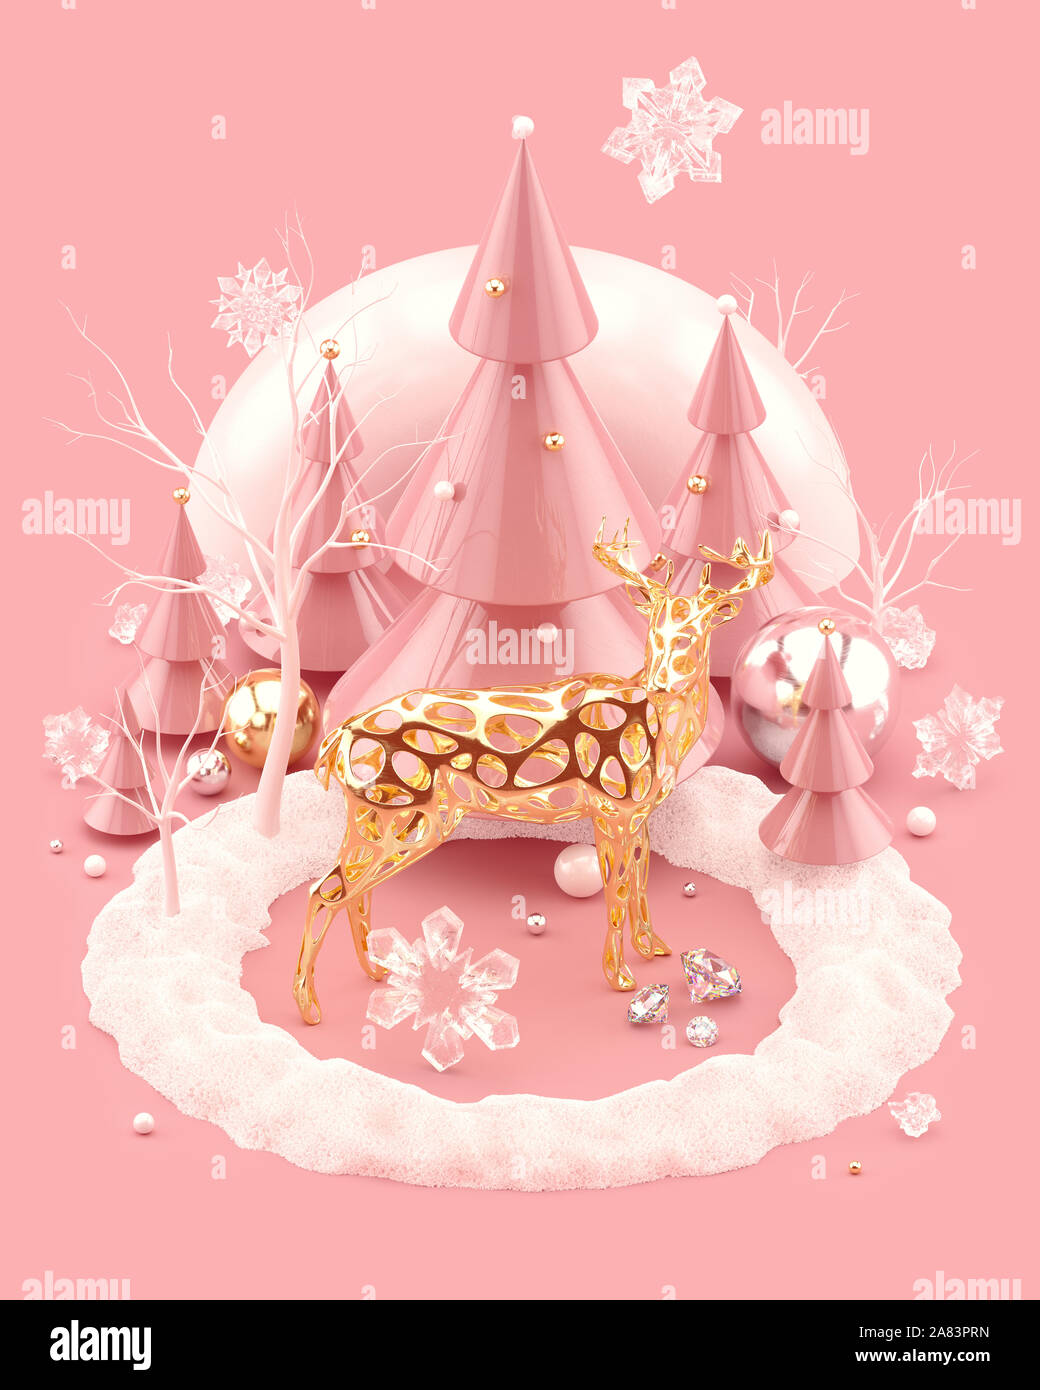 Christmas 3D illustration with golden Reindeer and festive Christmas trees. Abstract composition isolated on pink background. 3d rendering. Stock Photo